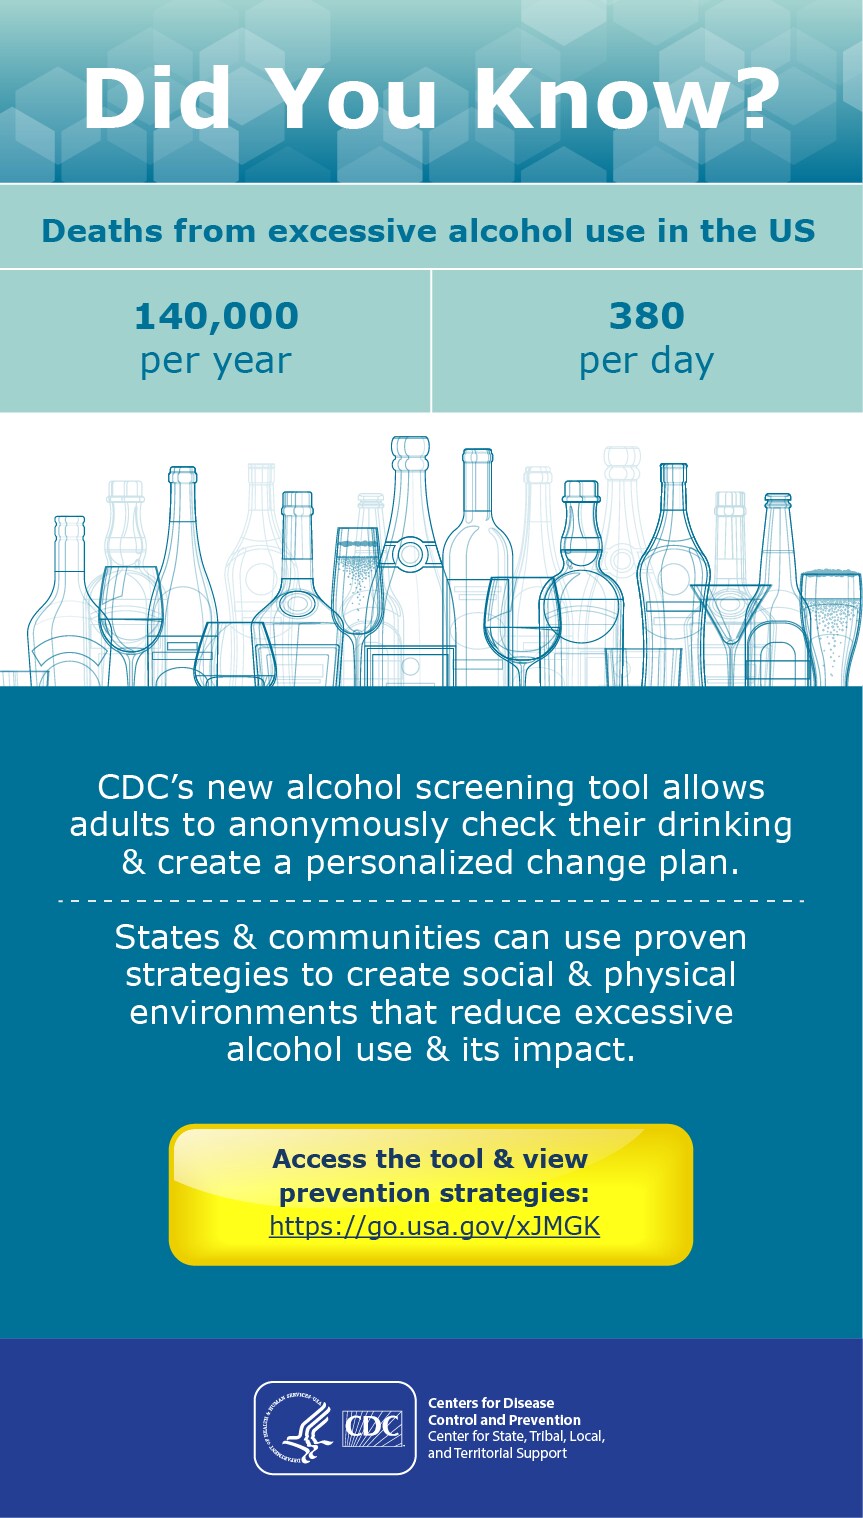 A graphic titled Did You Know? shows the outline of wine bottles and glasses below text that says: In the US, 140,000 people die per year and 380 people die per day from excessive alcohol use. CDC’s new alcohol screening tool allows adults to anonymously check their drinking & create a personalized change plan. States & communities can use proven strategies to create social & physical environments that reduce excessive alcohol use & its impact. Access the tool & view prevention strategies: https://go.usa.gov/xJMGK